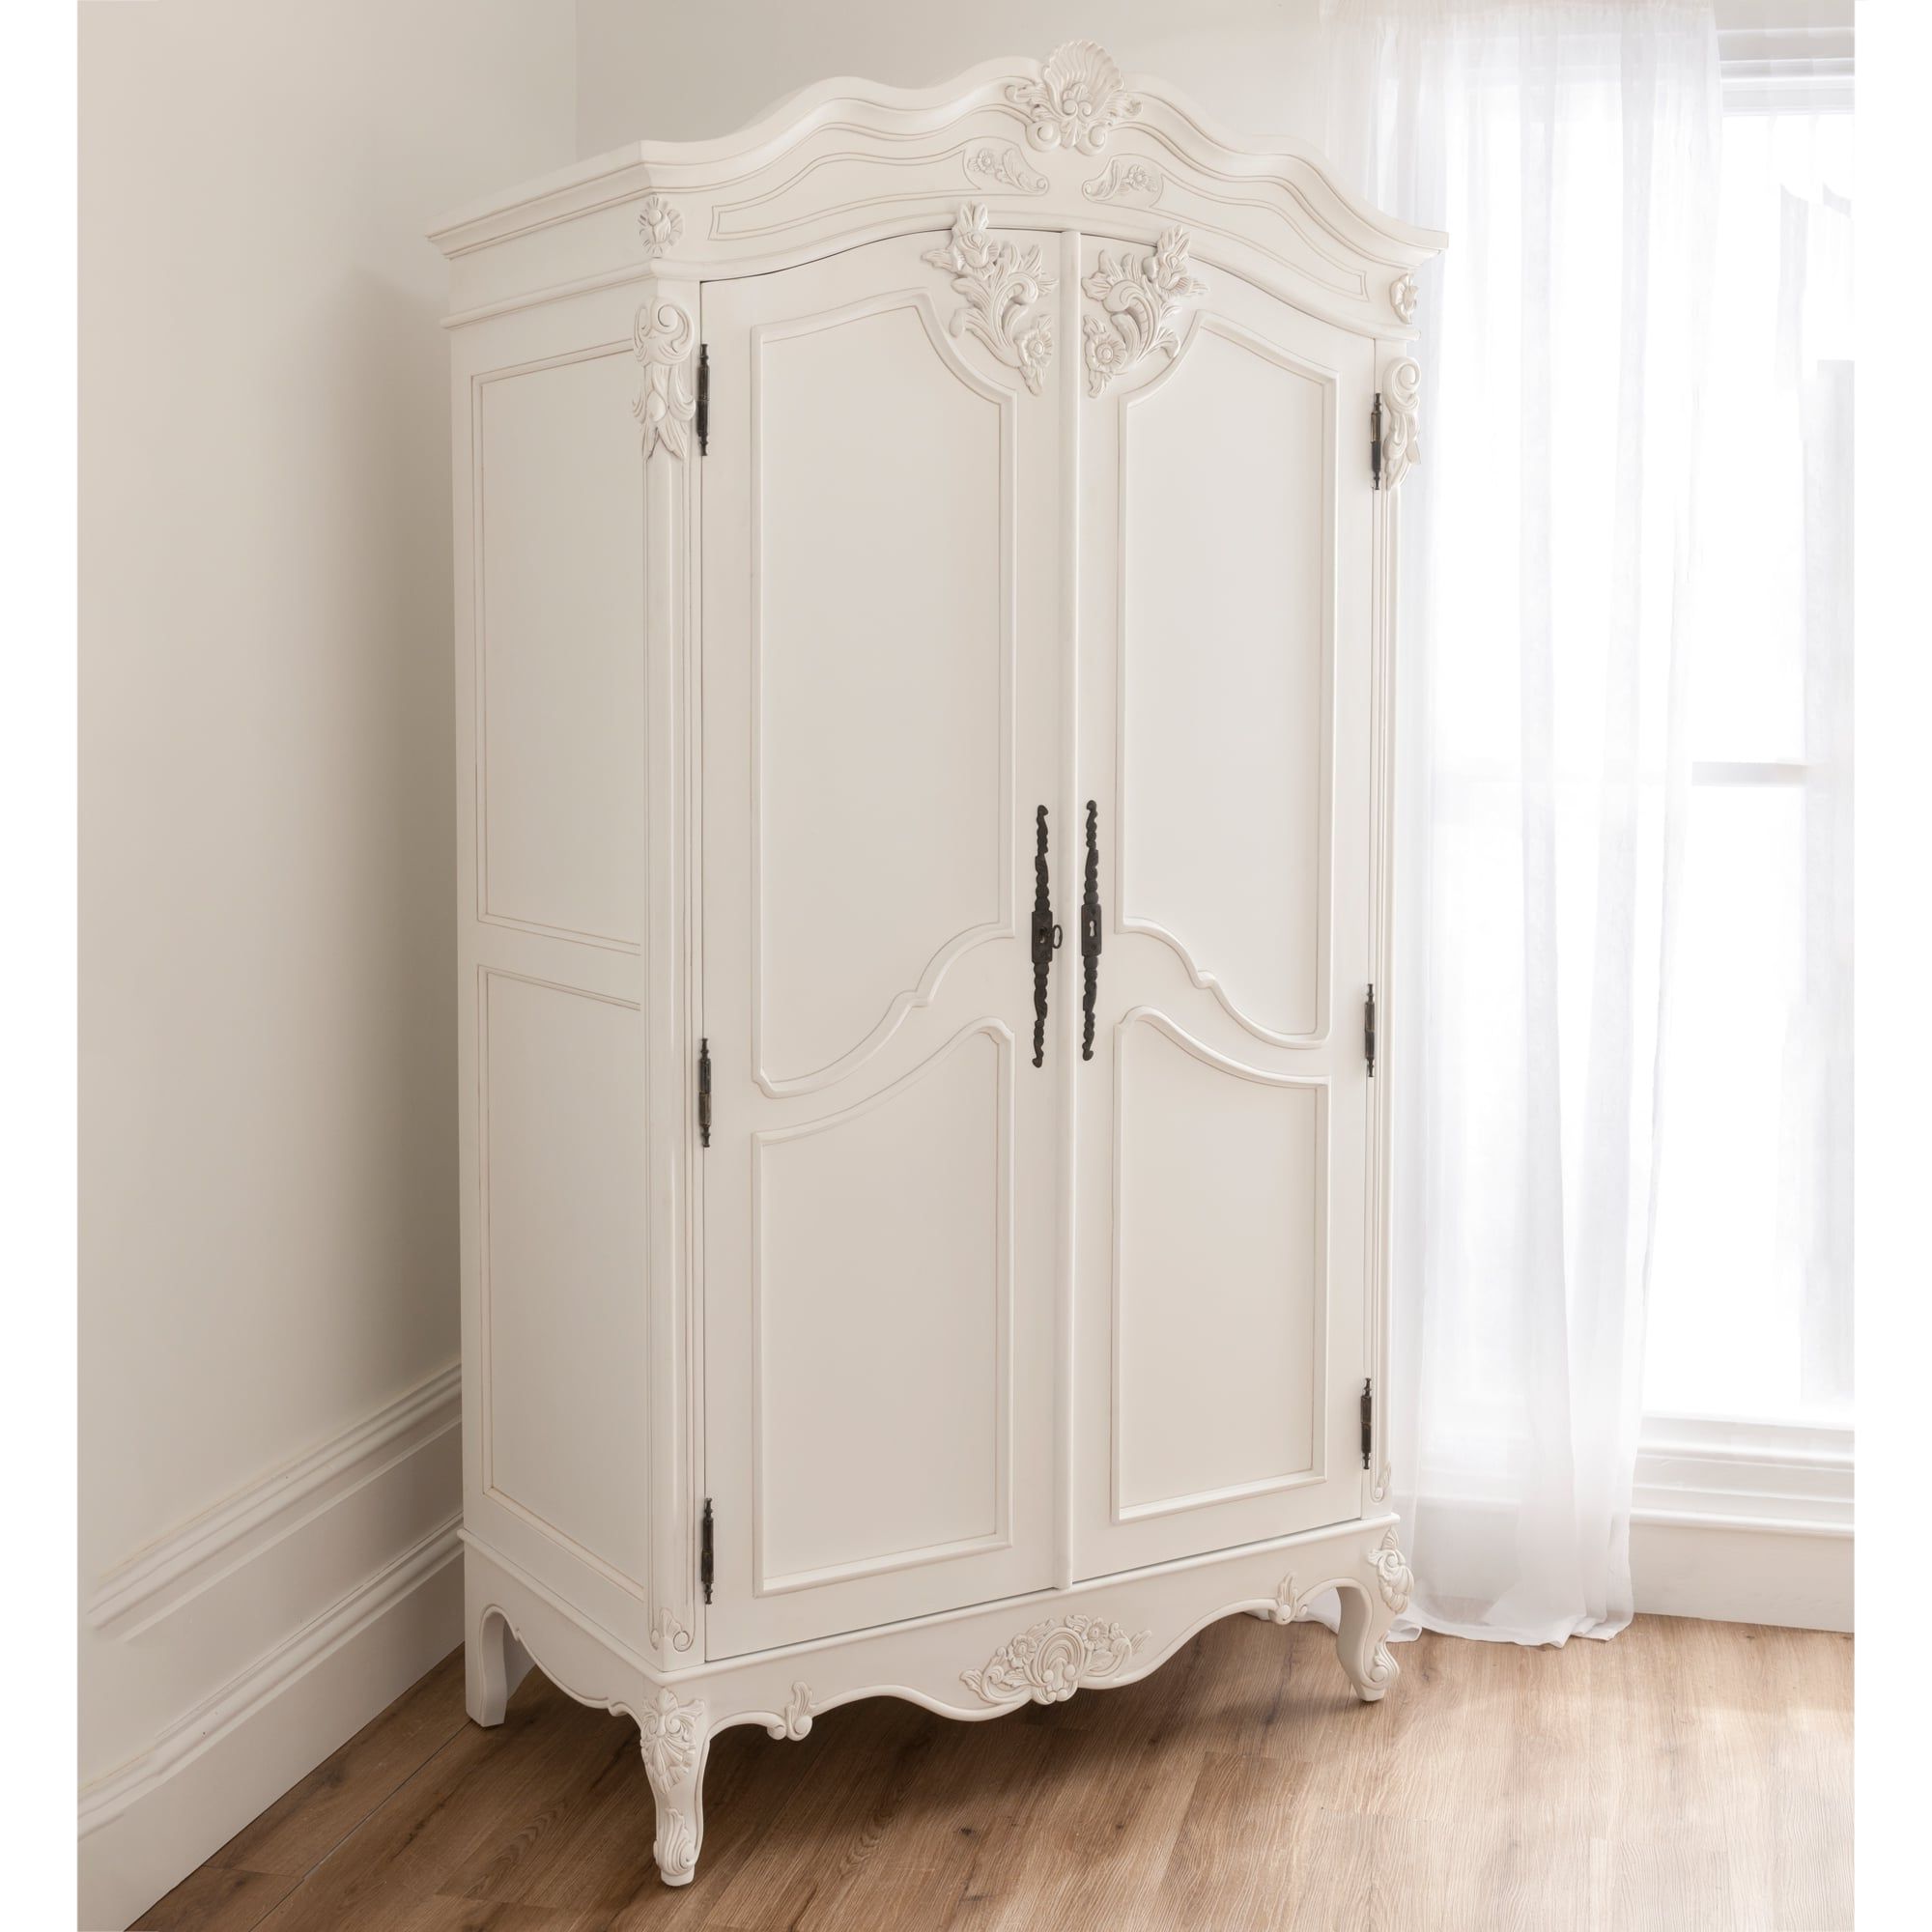 Baroque Antique French Wardrobe Is Available Online At Homesdirect365 Intended For French Wardrobes (View 2 of 20)